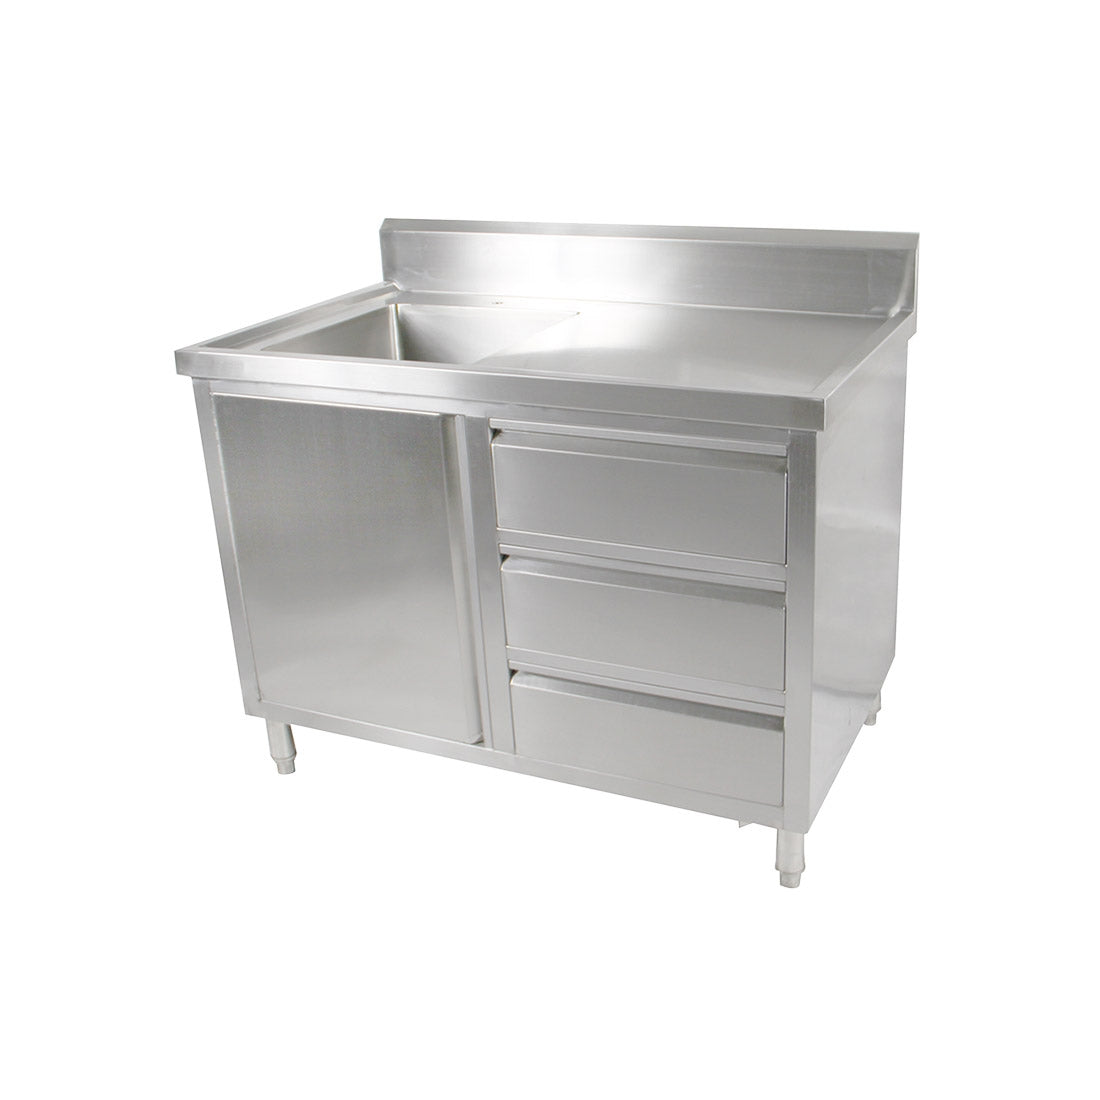 Modular Systems Cabinetd with Left Sink 1200x600x900 SC-6-1200L-H